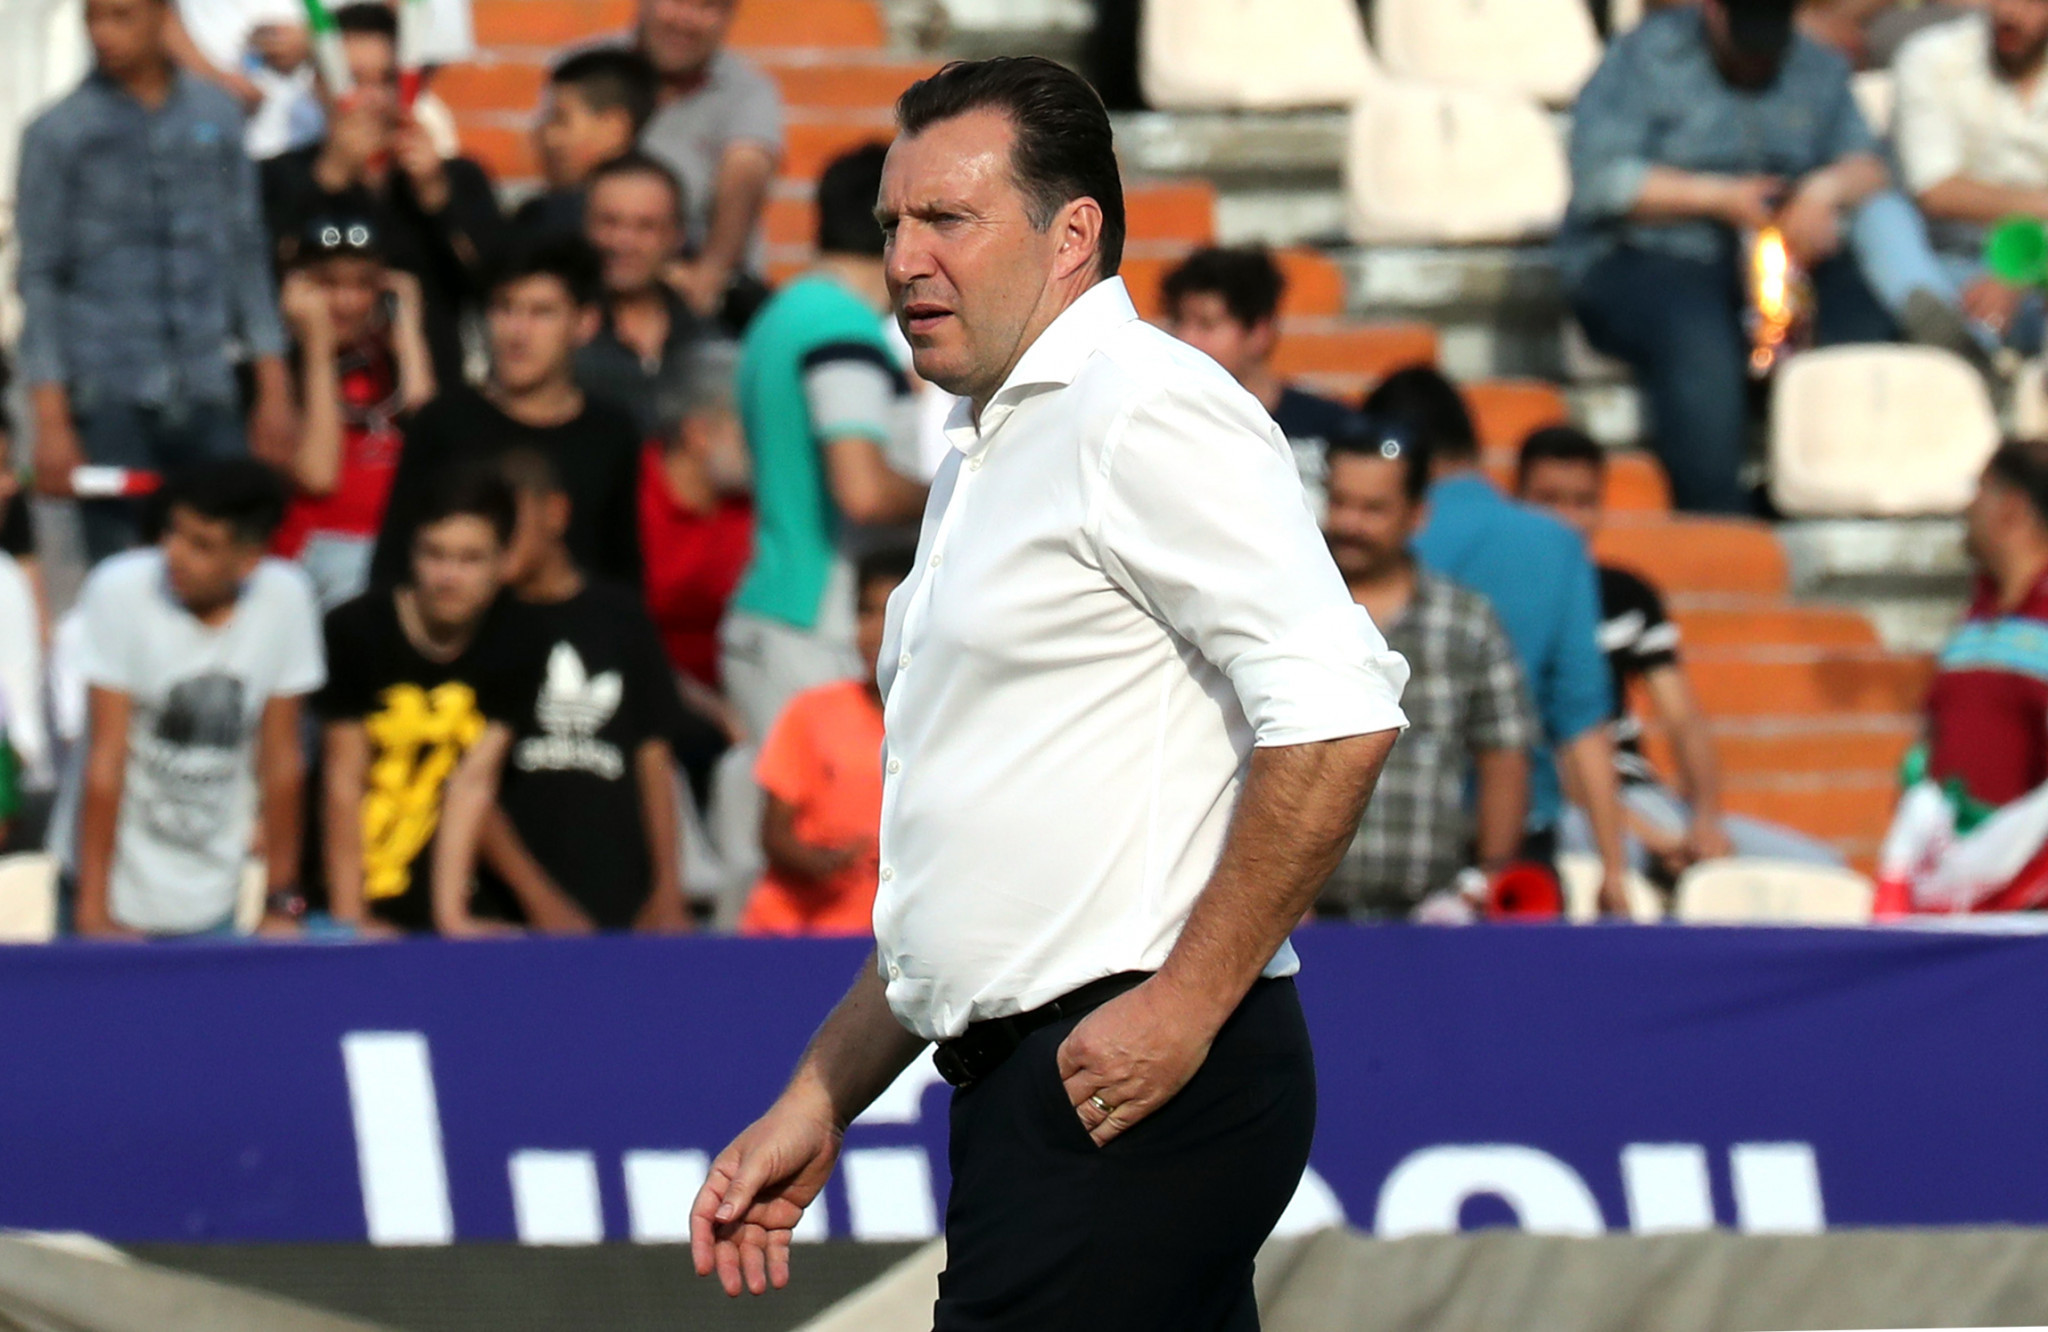 FIFA warned Iran for interference during a dispute with former coach Marc Wilmots ©Getty Images